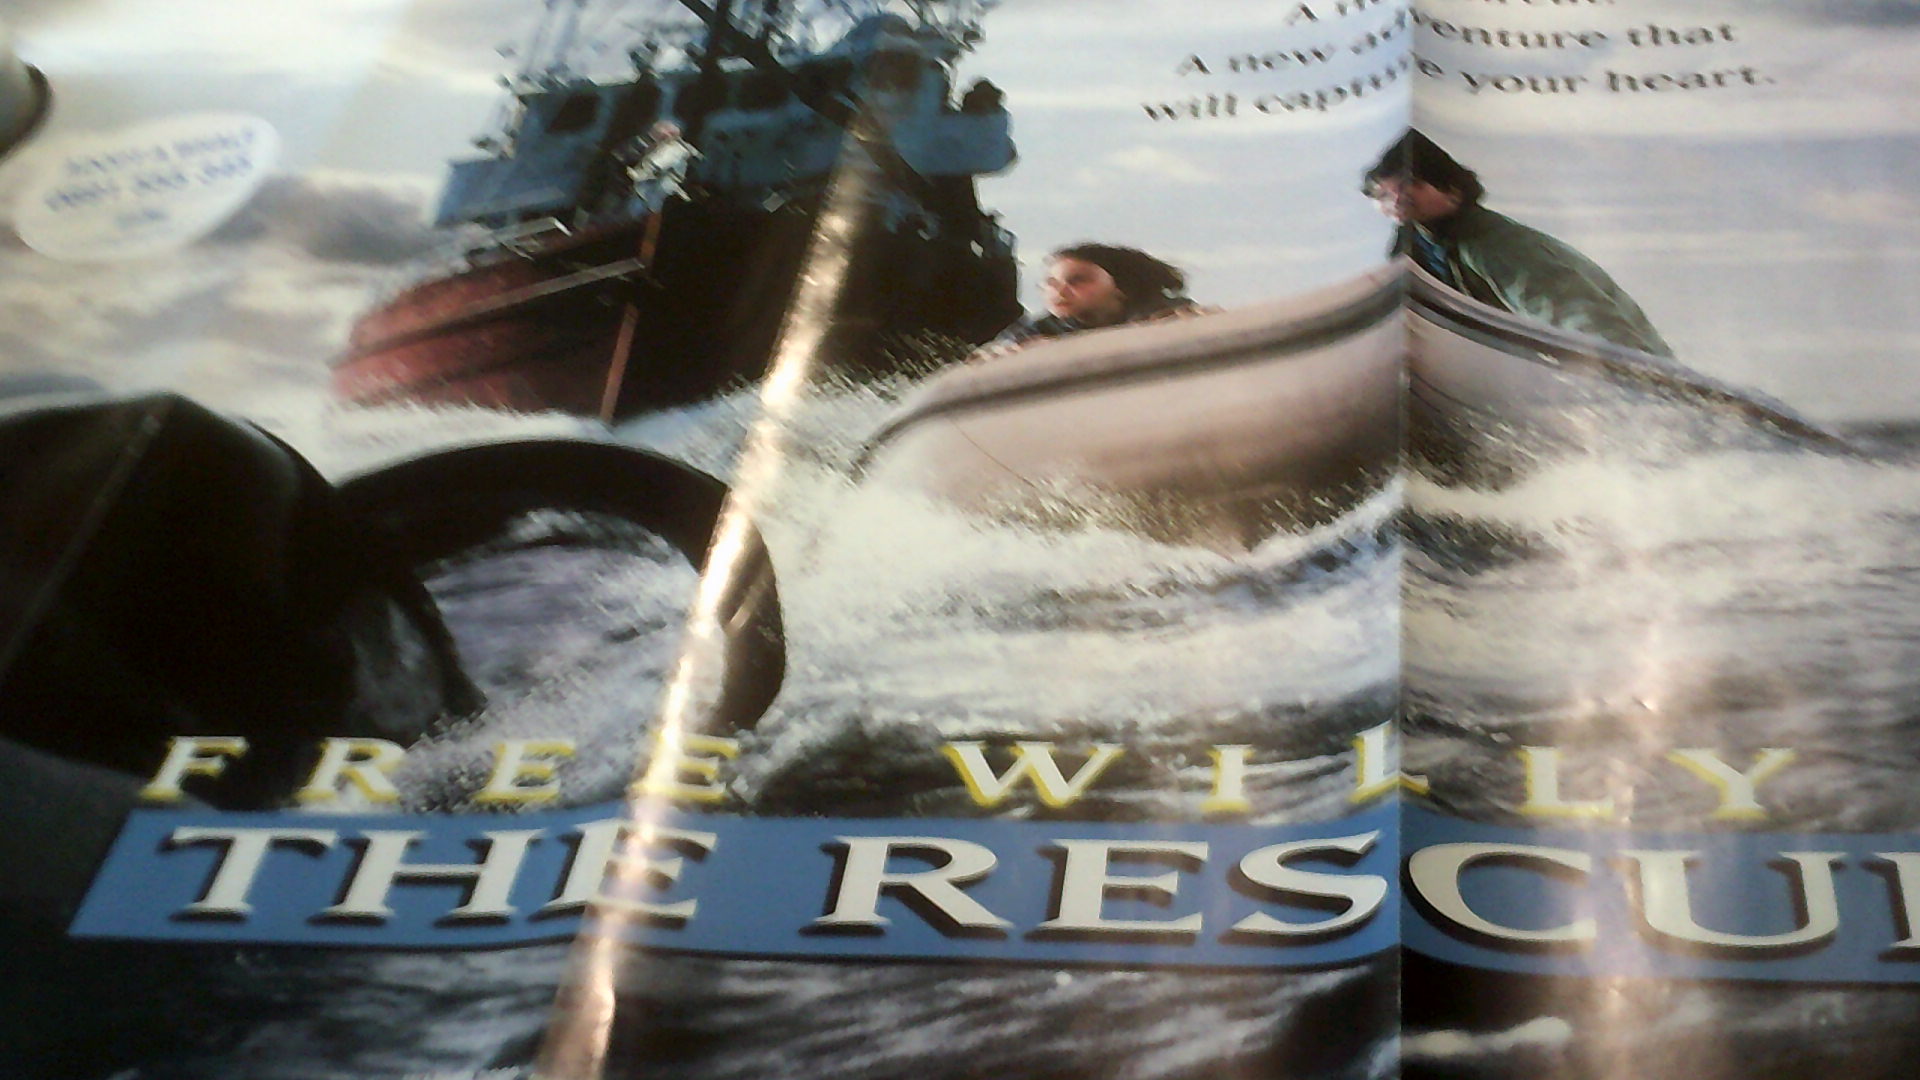 Poster-Free Willy-Warner-The Rescue-30 x 36 approx.